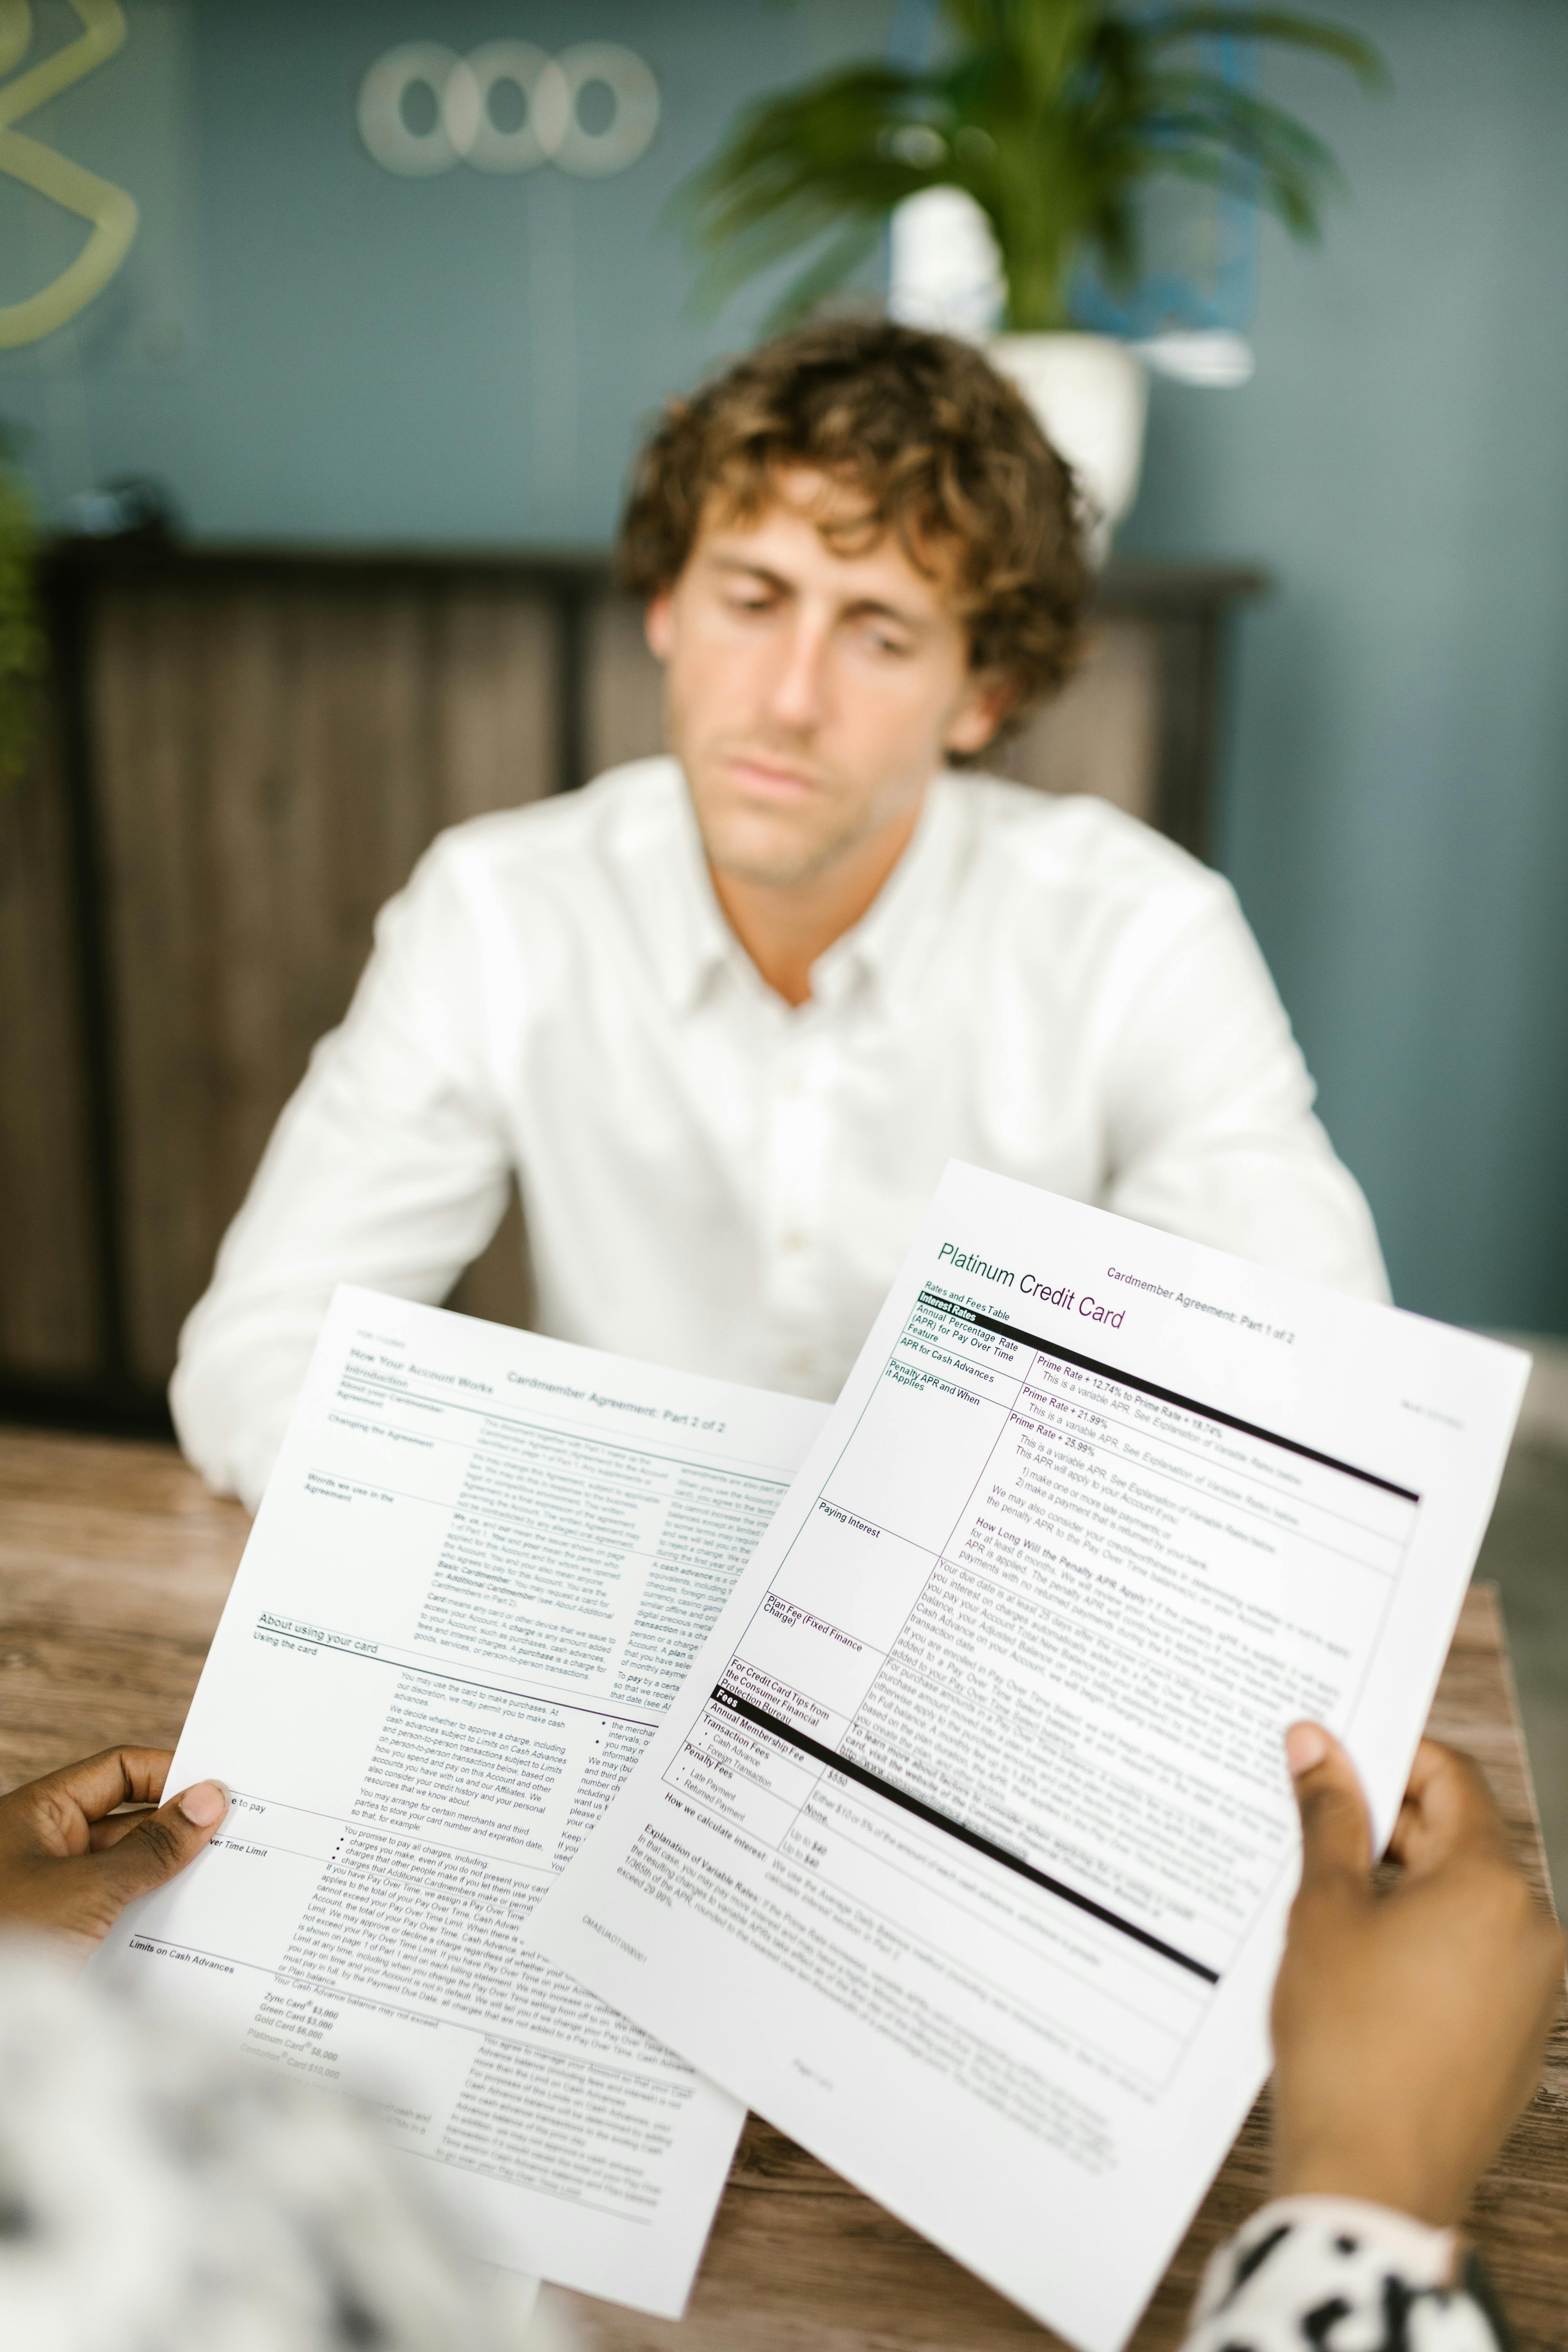 A man applying with papers | Source: Pexels